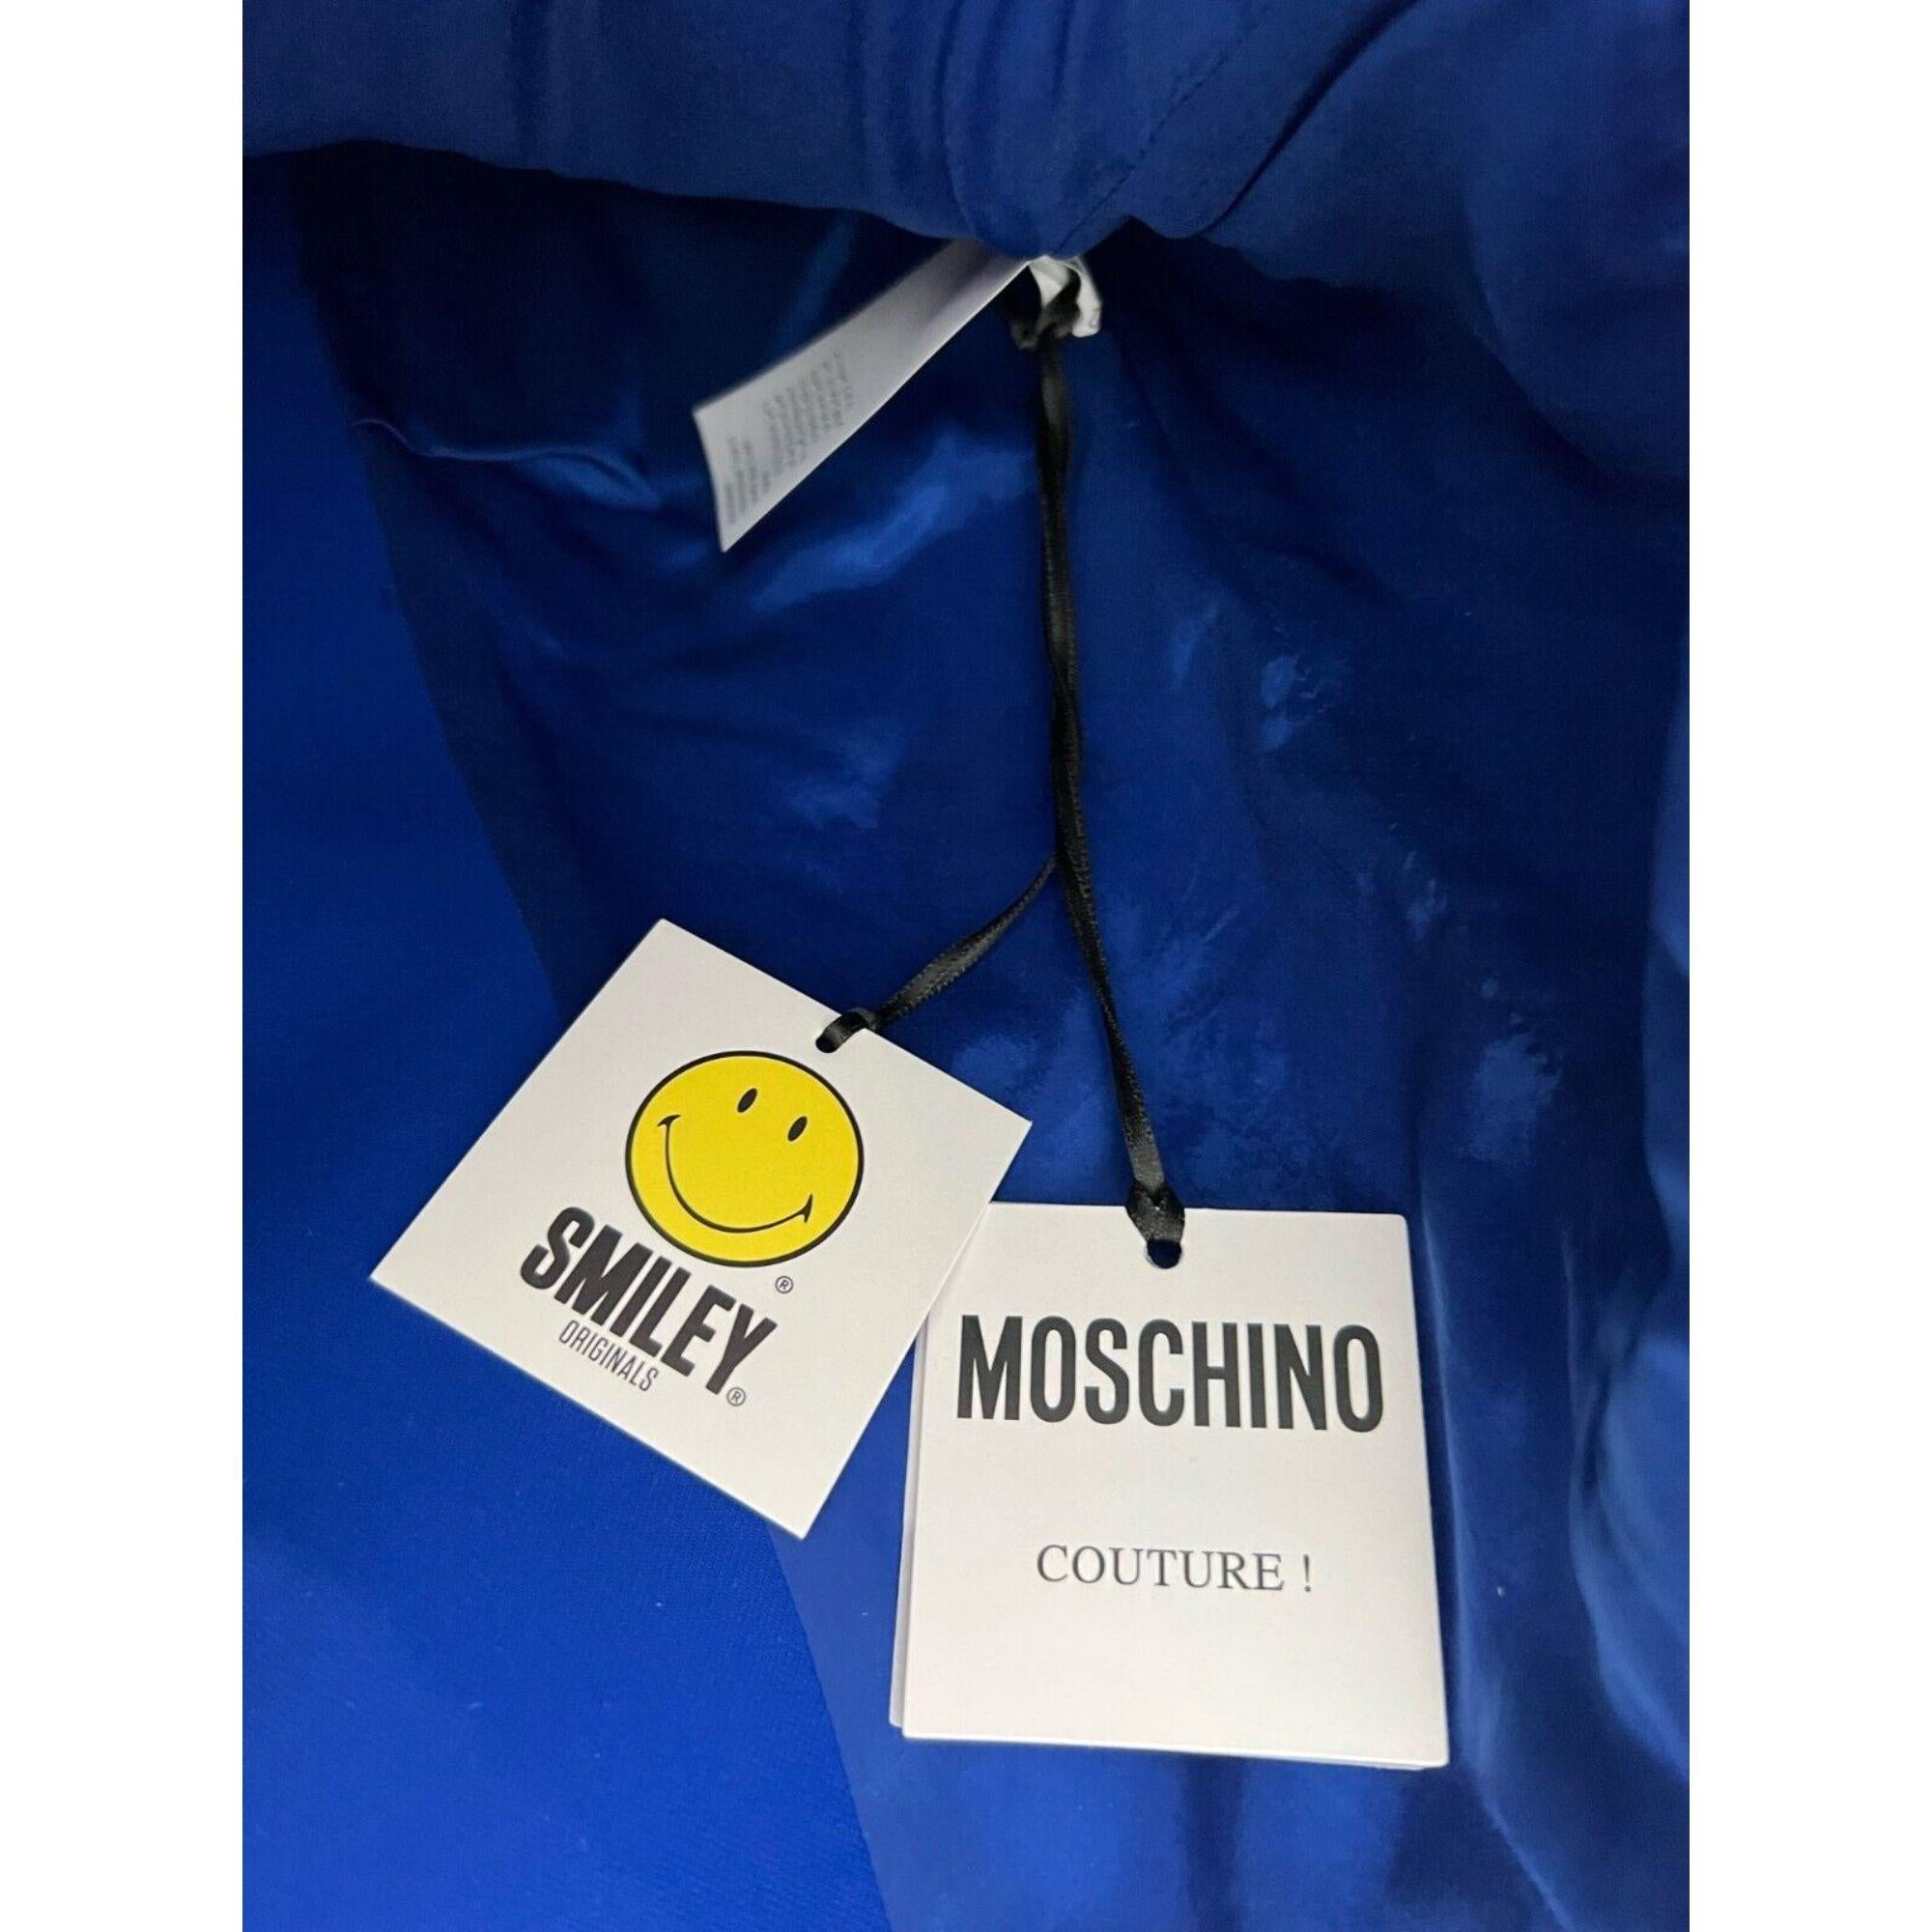 SS21 Moschino Couture BlueBlazer Smiley Face by Jeremy Scott, Size US 12 For Sale 5